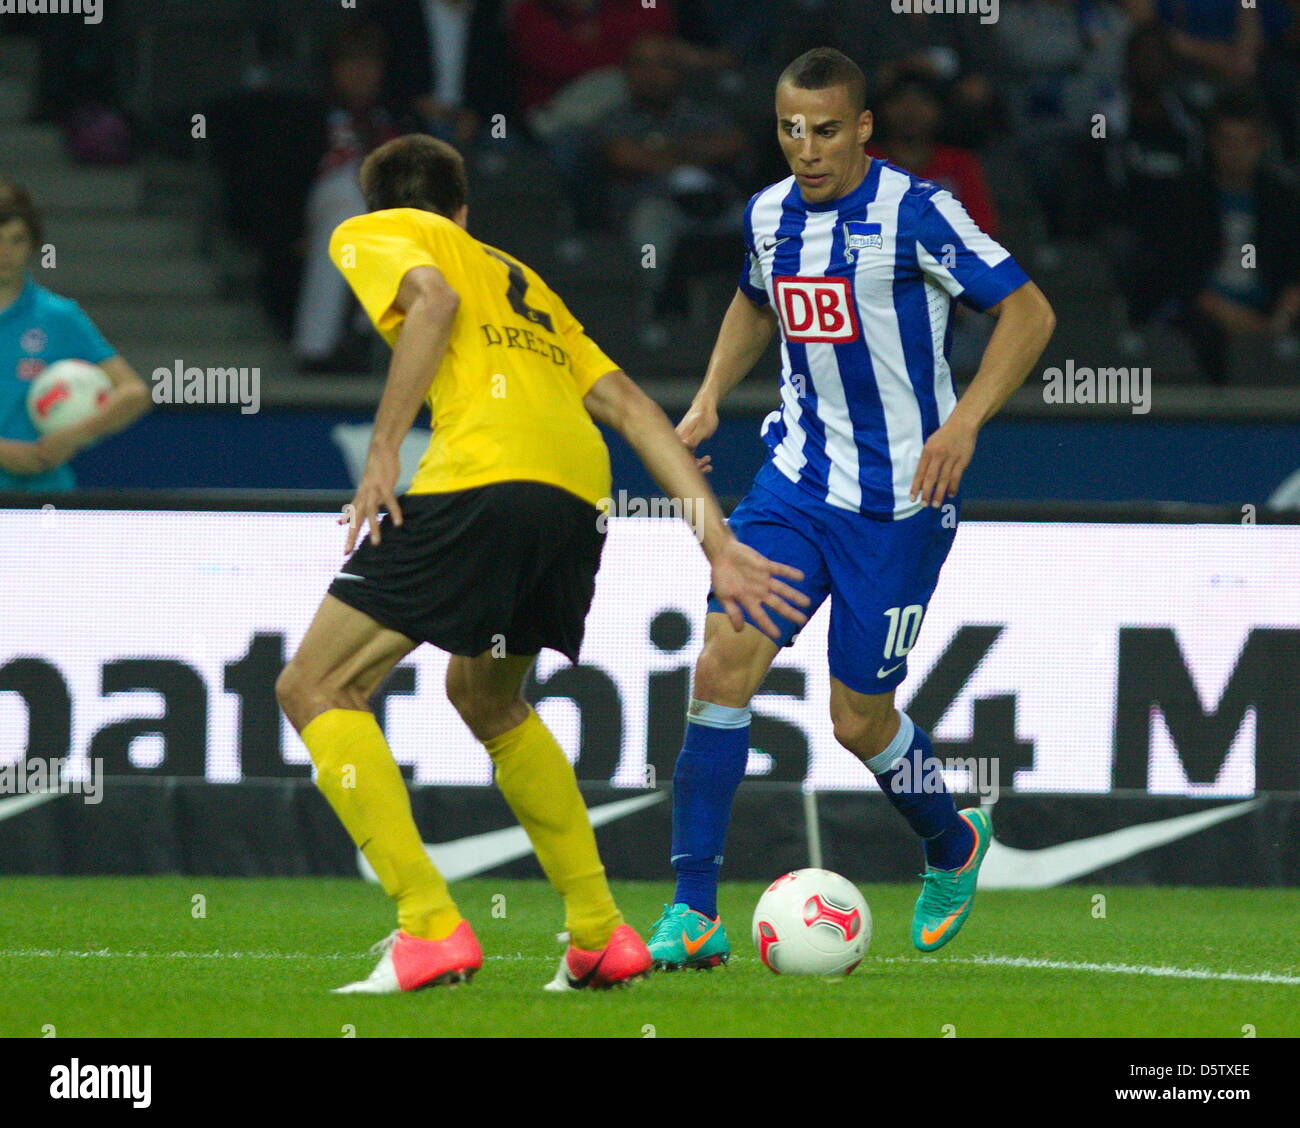 Hertha's Aenis Ben-Hatira and Dresden's vie for the ball during the 2nd Bundesliga soccer match between Hertha BSC and Dynamo Dresden at the Olympic Stadium in Berlin, Germany, 26 September 2012. Hertha won the match 1-0. Photo: Max Nikelski Stock Photo